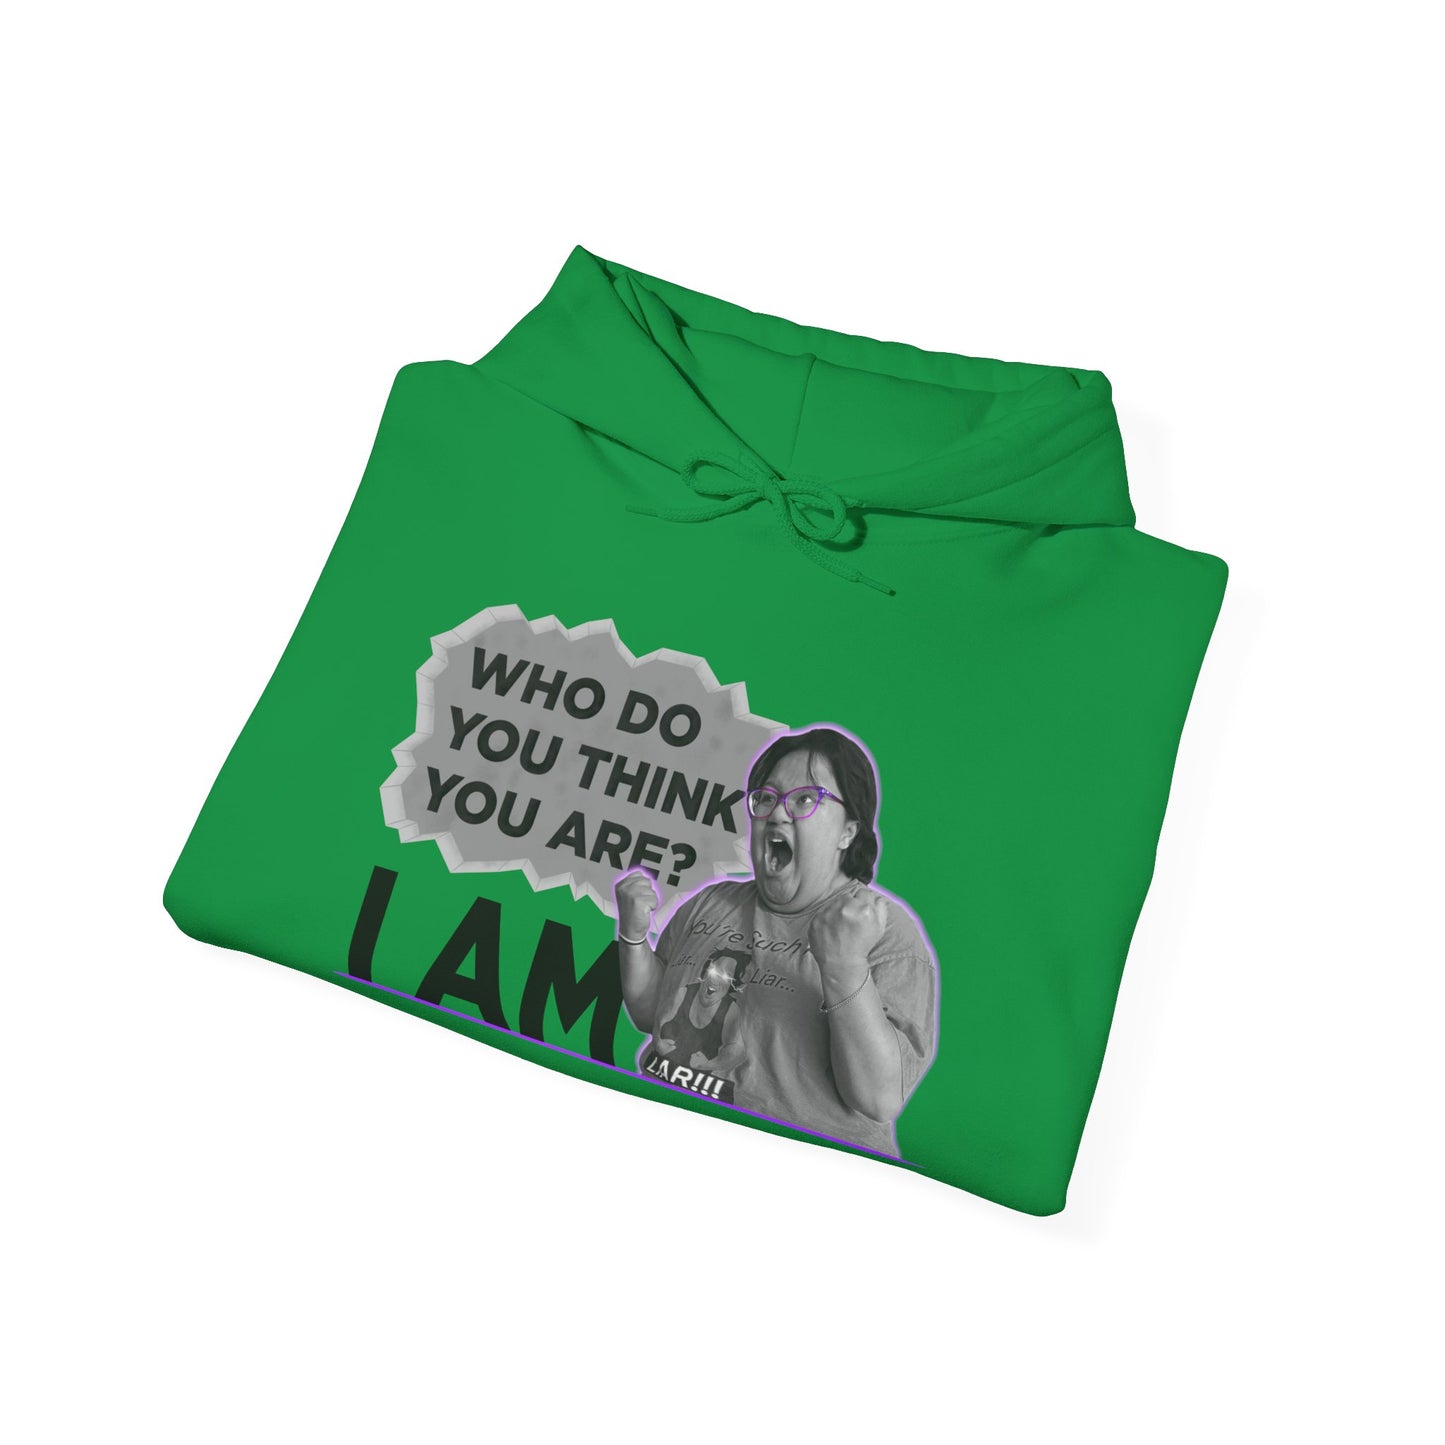 Who do you think you are? I am! MG Hoodie